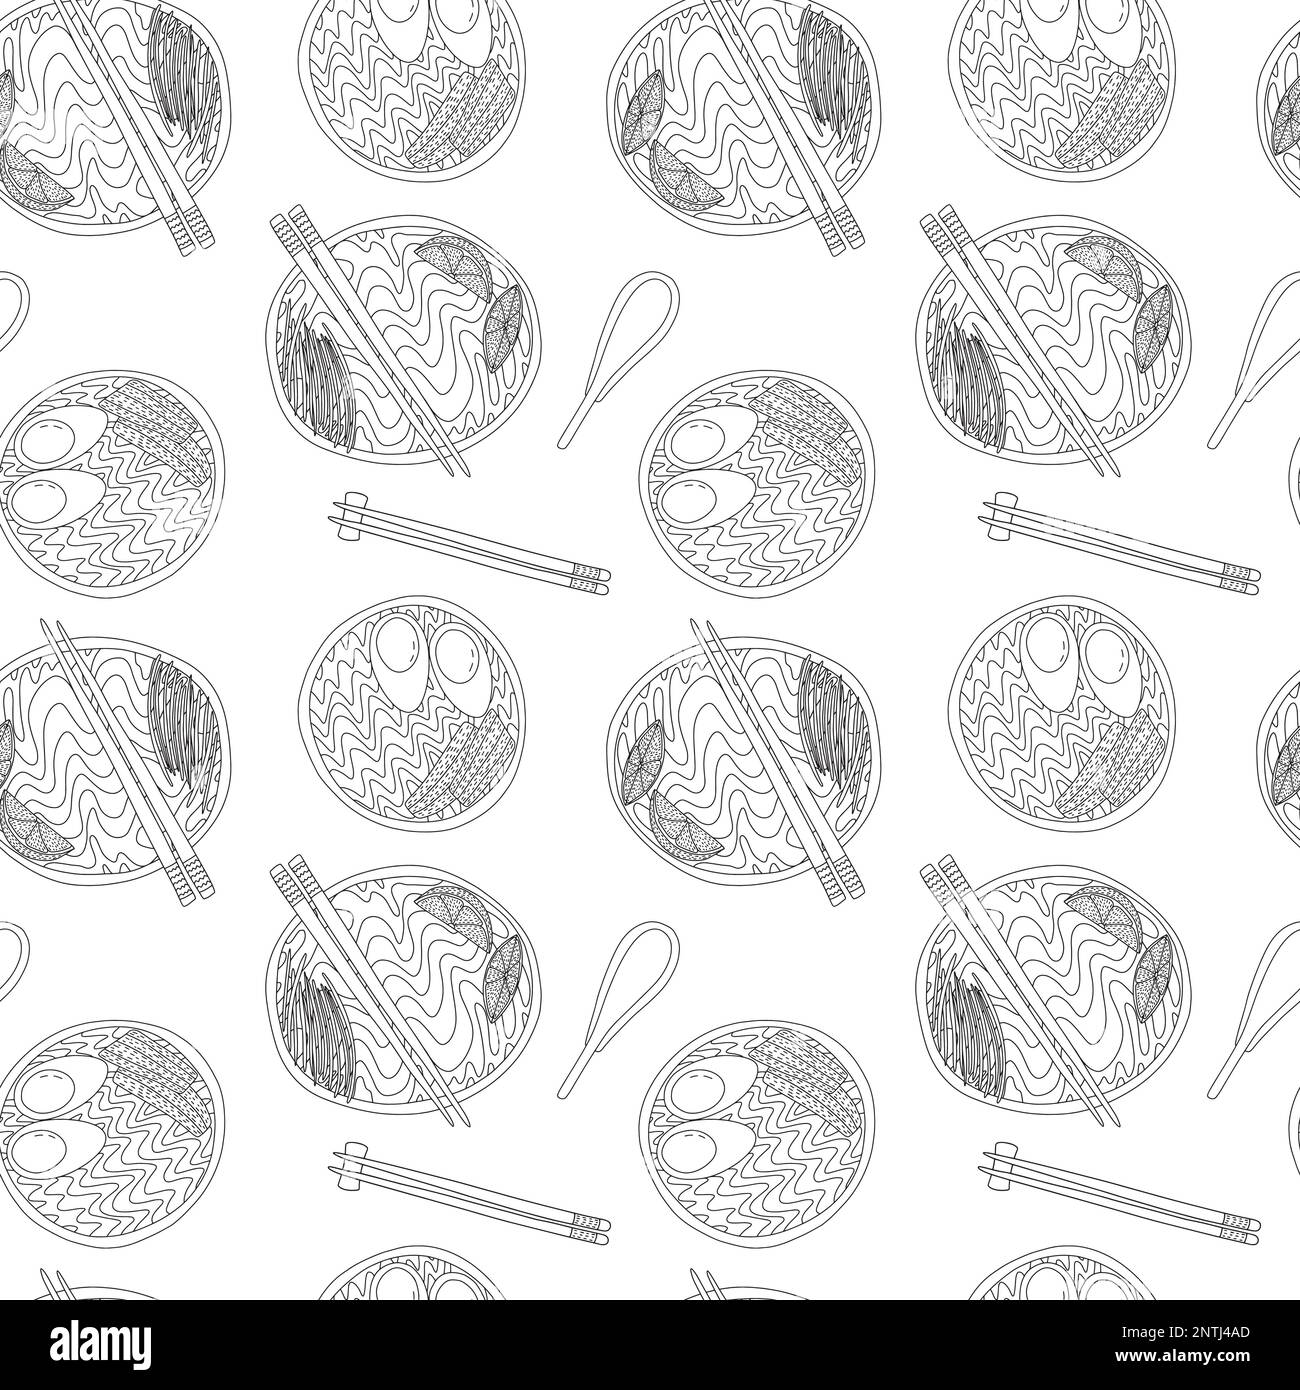 Vector Pad Thai noodles seamless pattern Stock Vector